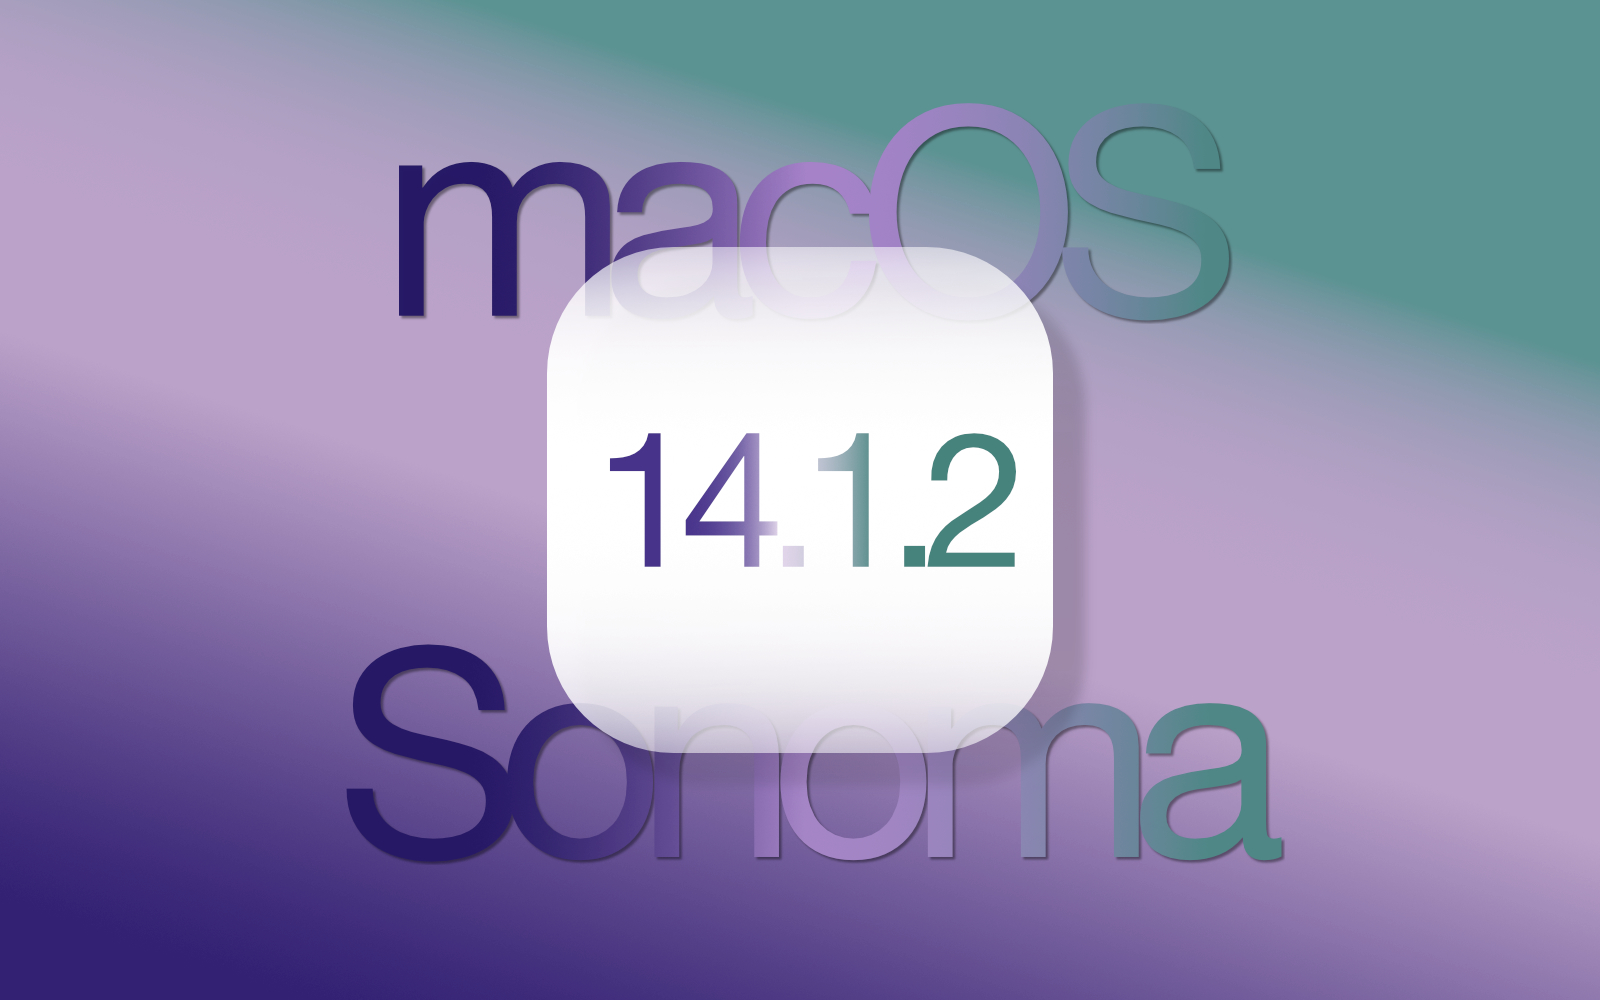 Macos Sonoma 14 1 2 official release